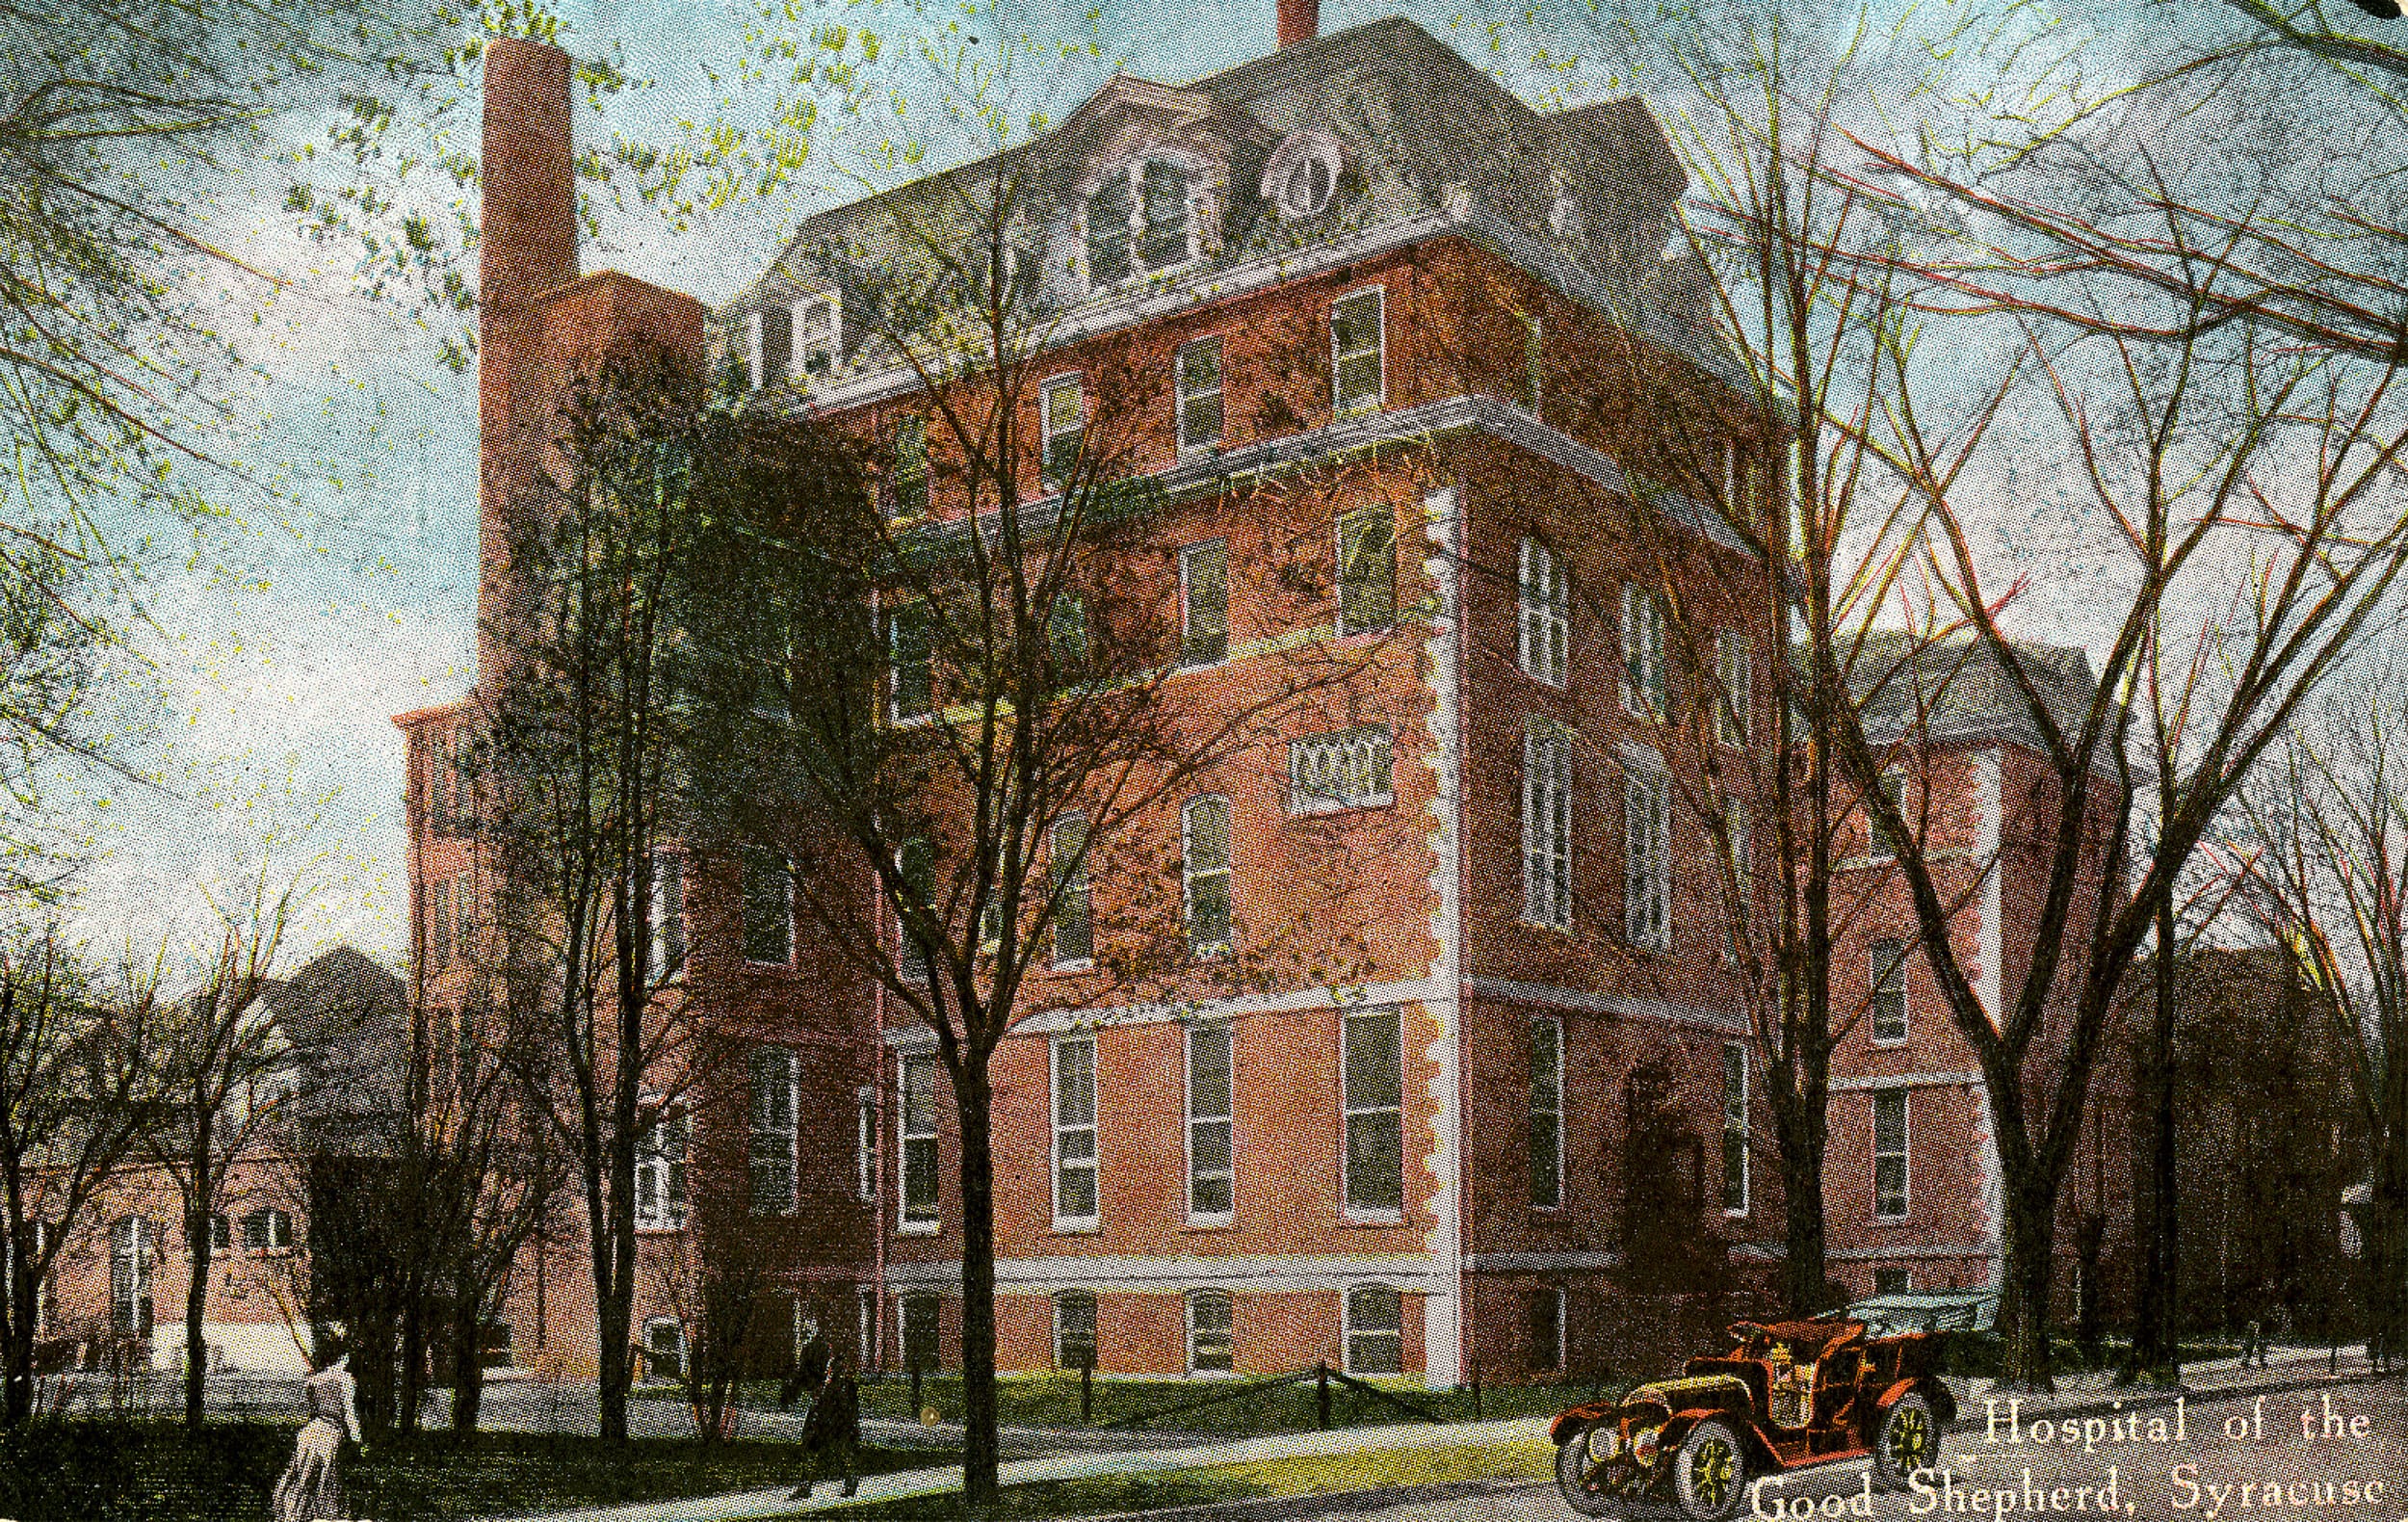 A postcard of the Hospital of the Good Shepherd (1912)